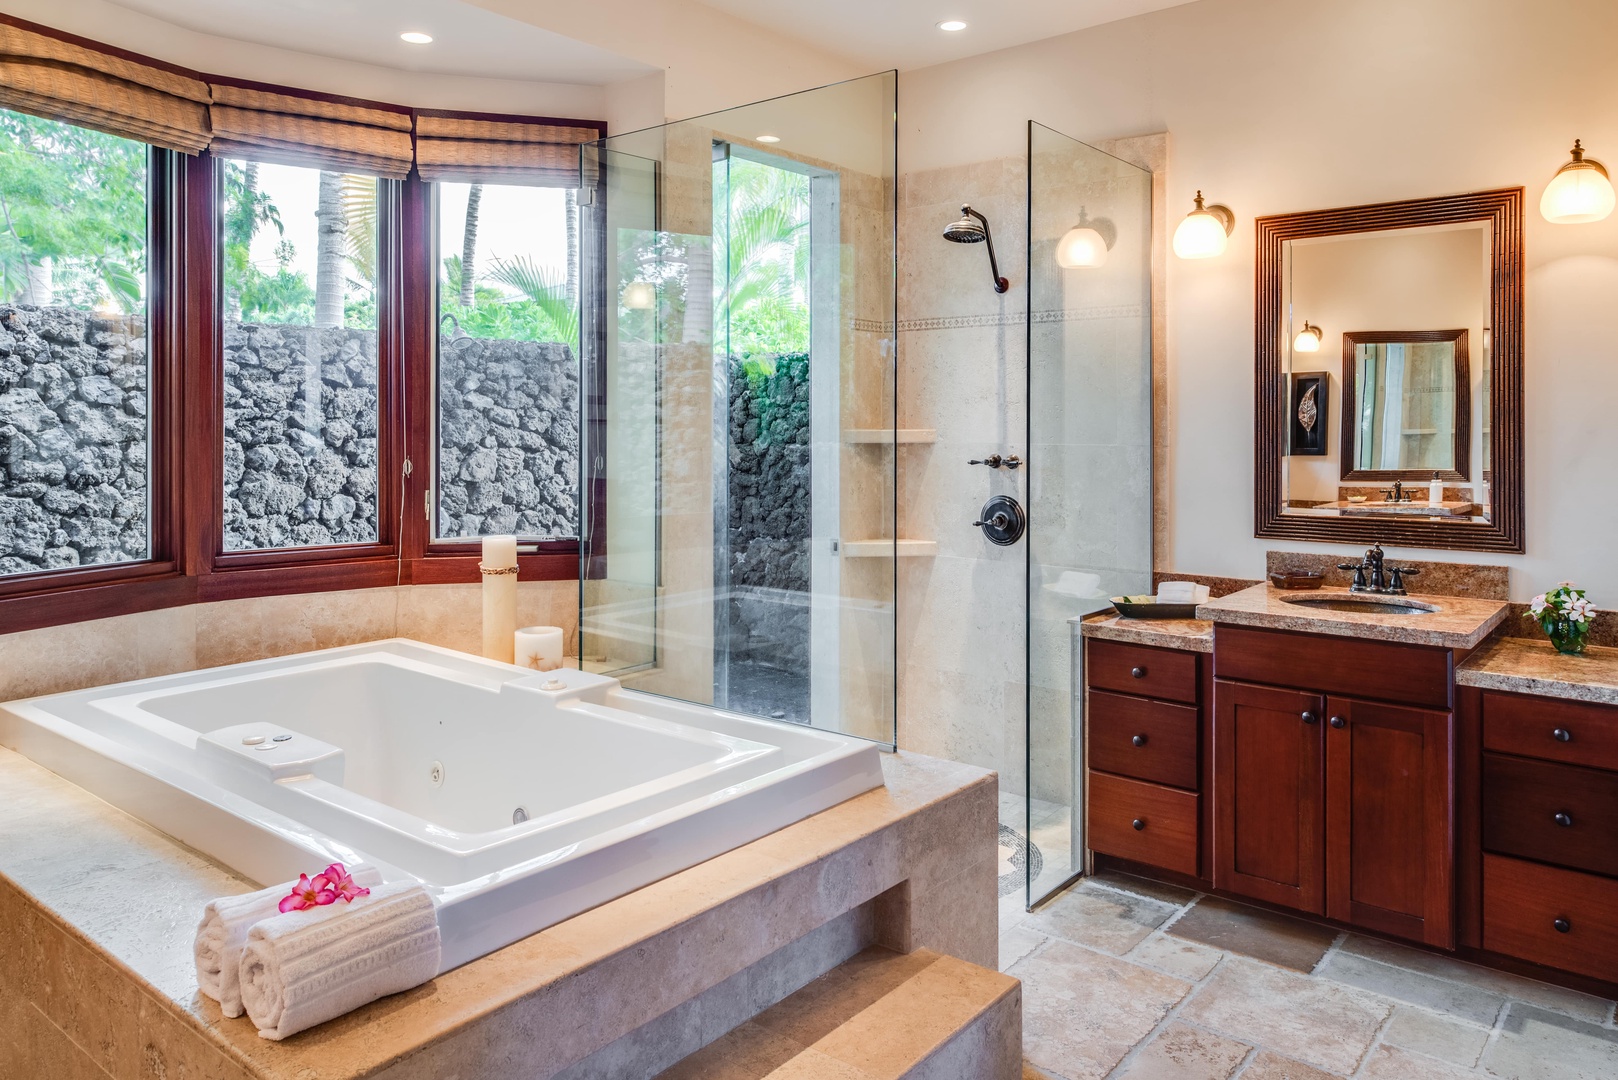 Kamuela Vacation Rentals, House of the Turtle at Champion Ridge, Mauna Lani (CR 18) - The Jacuzzi tub is adjacent to the glass enclosed walk-in shower.